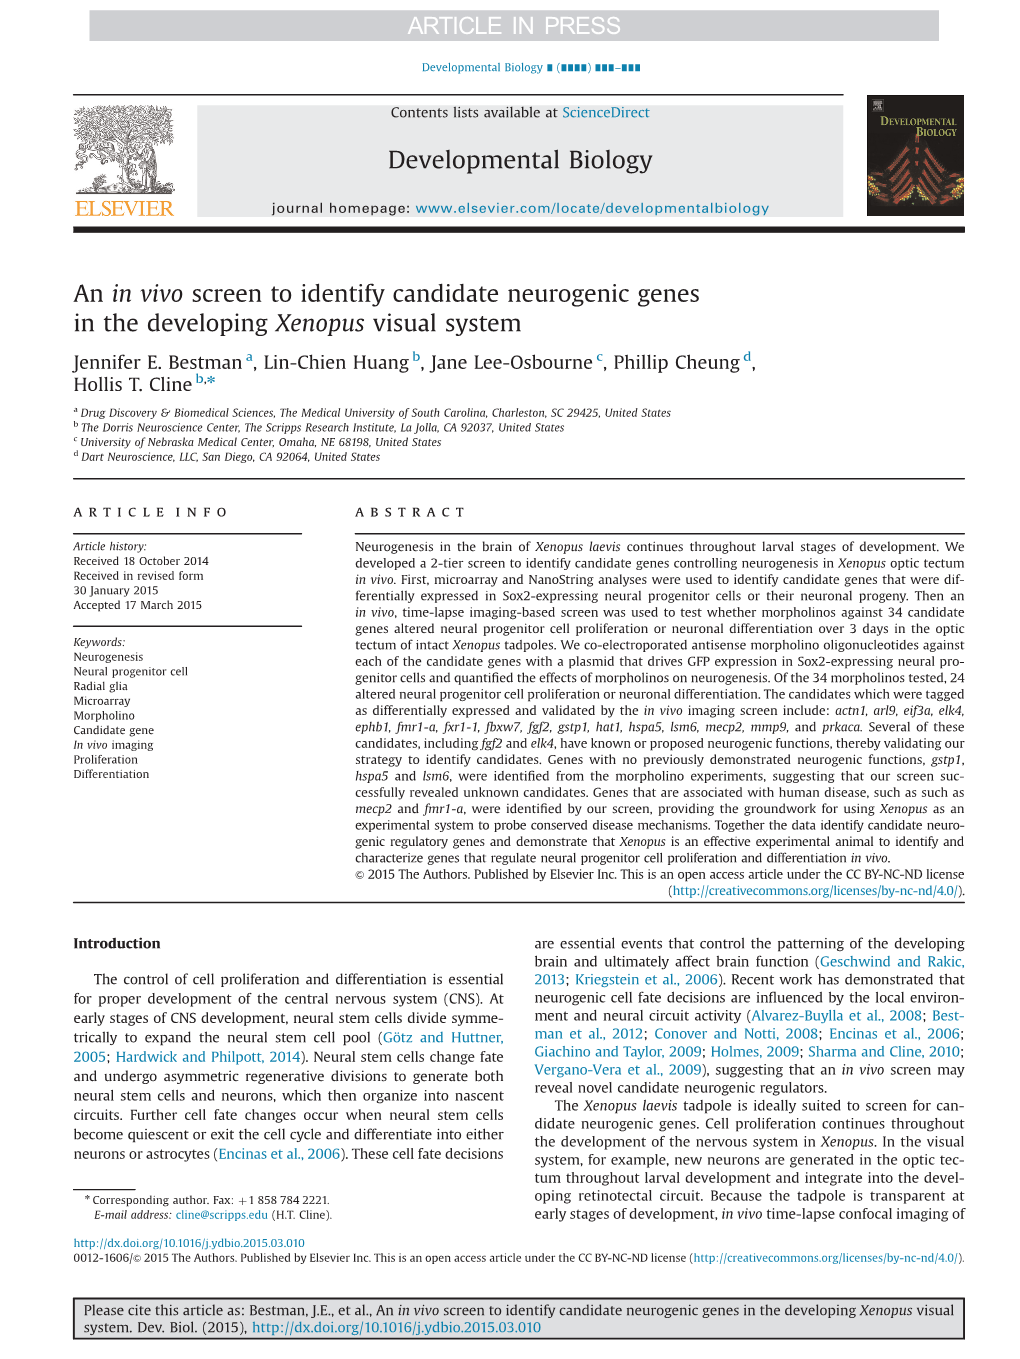 An in Vivo Screen to Identify Candidate Neurogenic Genes in the Developing Xenopus Visual System